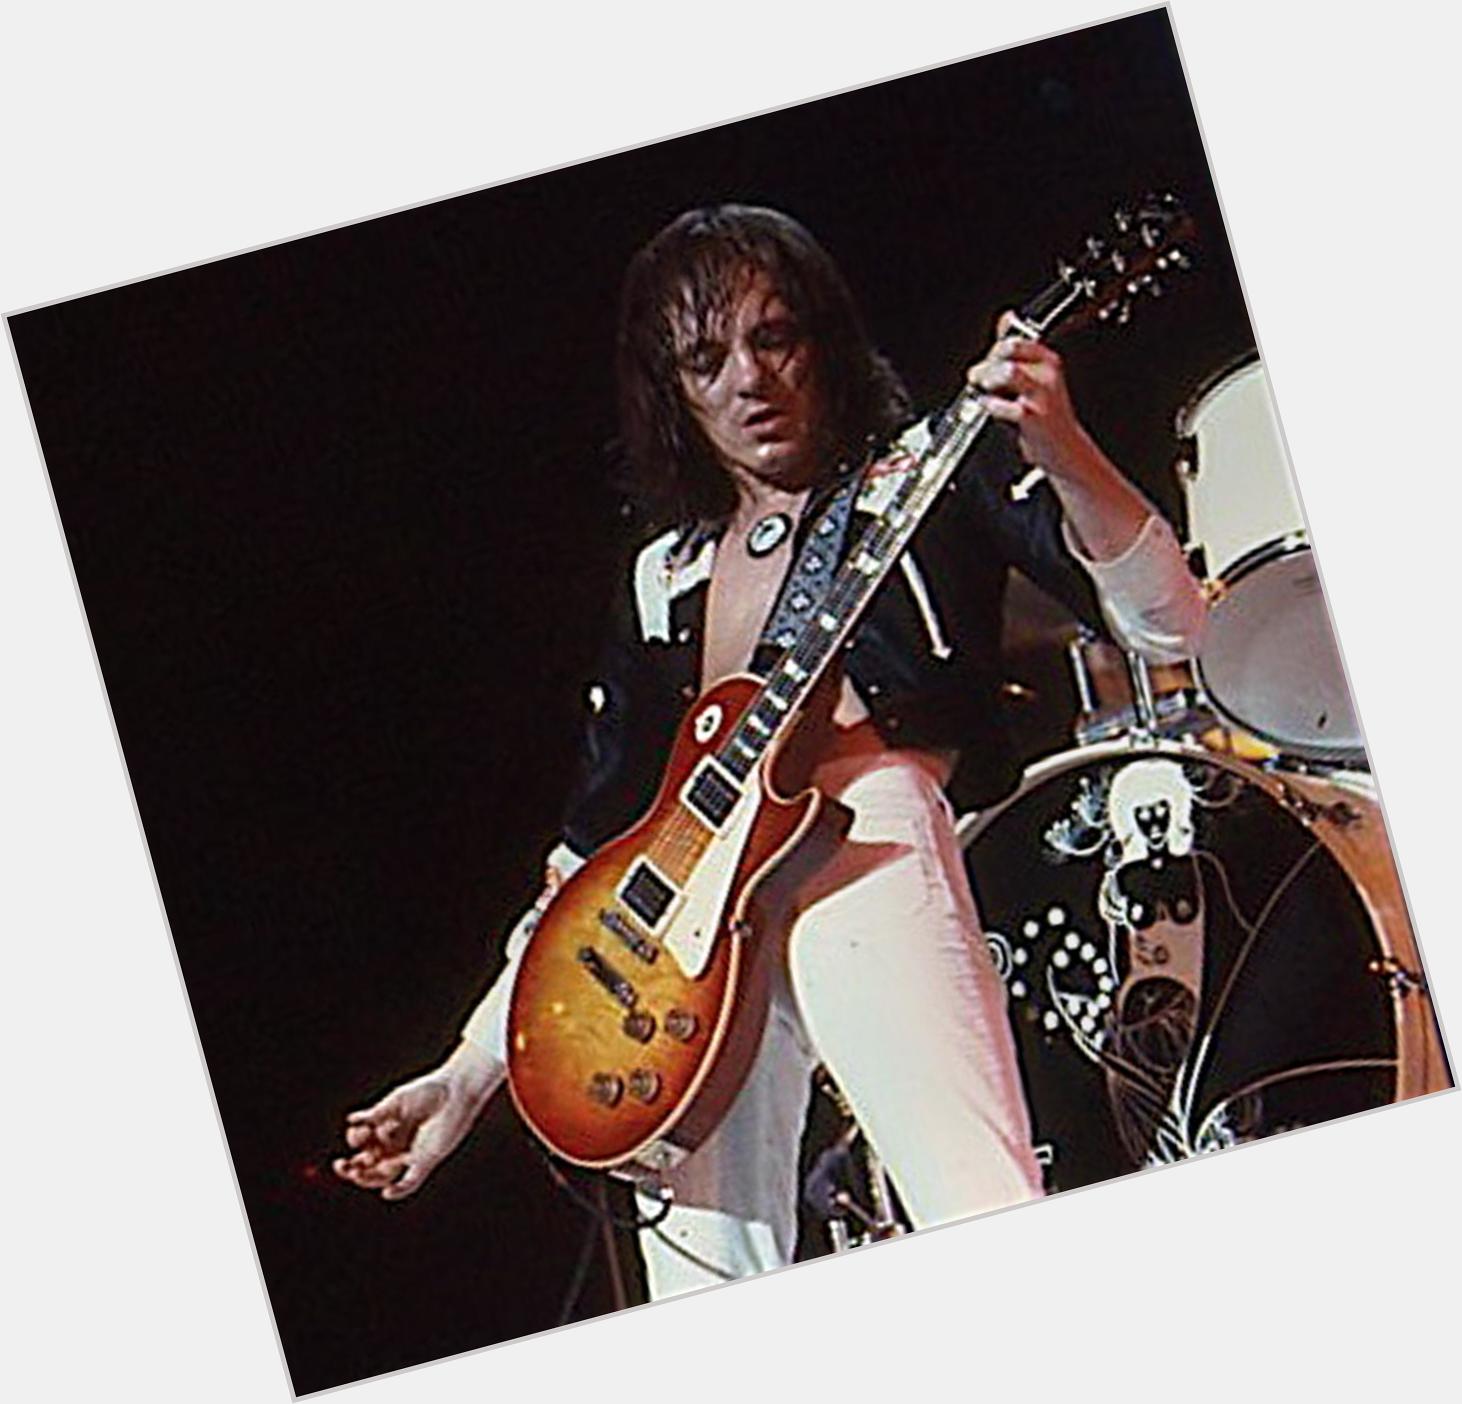 Happy birthday Steve Marriott (Jan 30, 1947 - Apr 20, 1991), frontman for Small Faces ( & Humble Pie! 